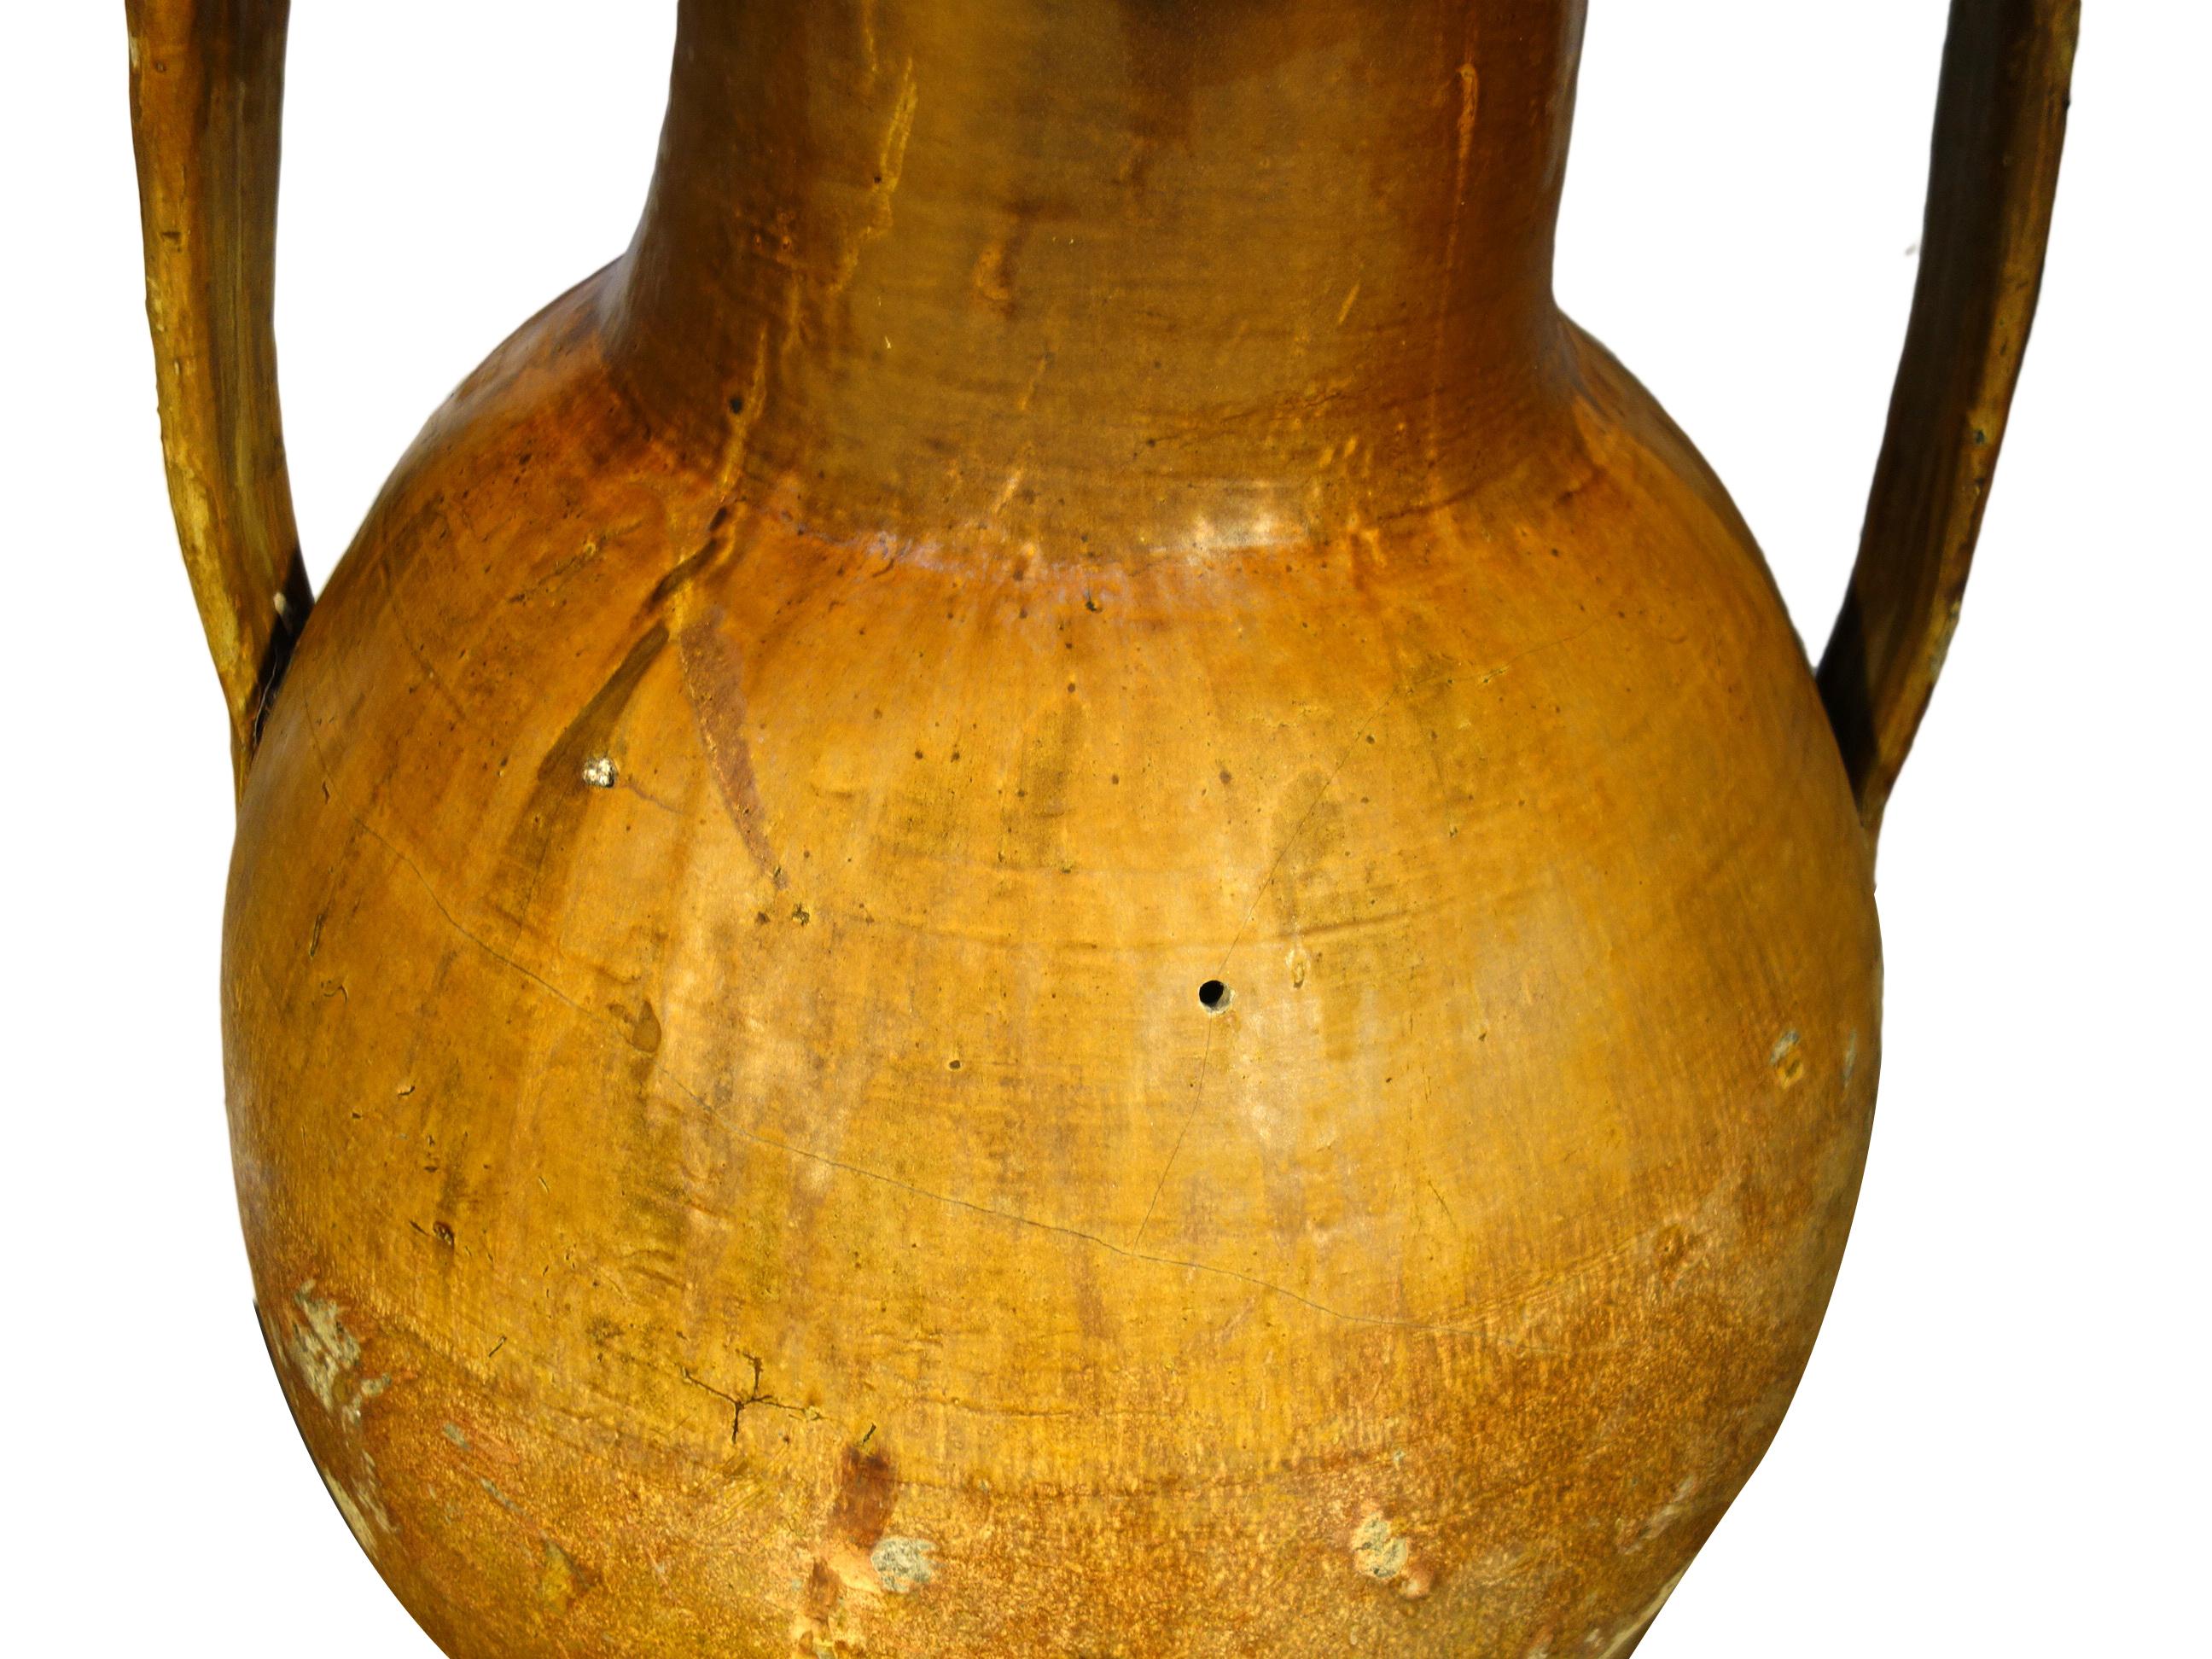 Antique Italian Orcio Puglia large terracotta vessel with ochre & umber glaze.
Authentic Mediterranean antique pottery, two-handled amphora jar with lower spout from Apulia region of southern Italy. Handcrafted earthenware of terracotta with unique